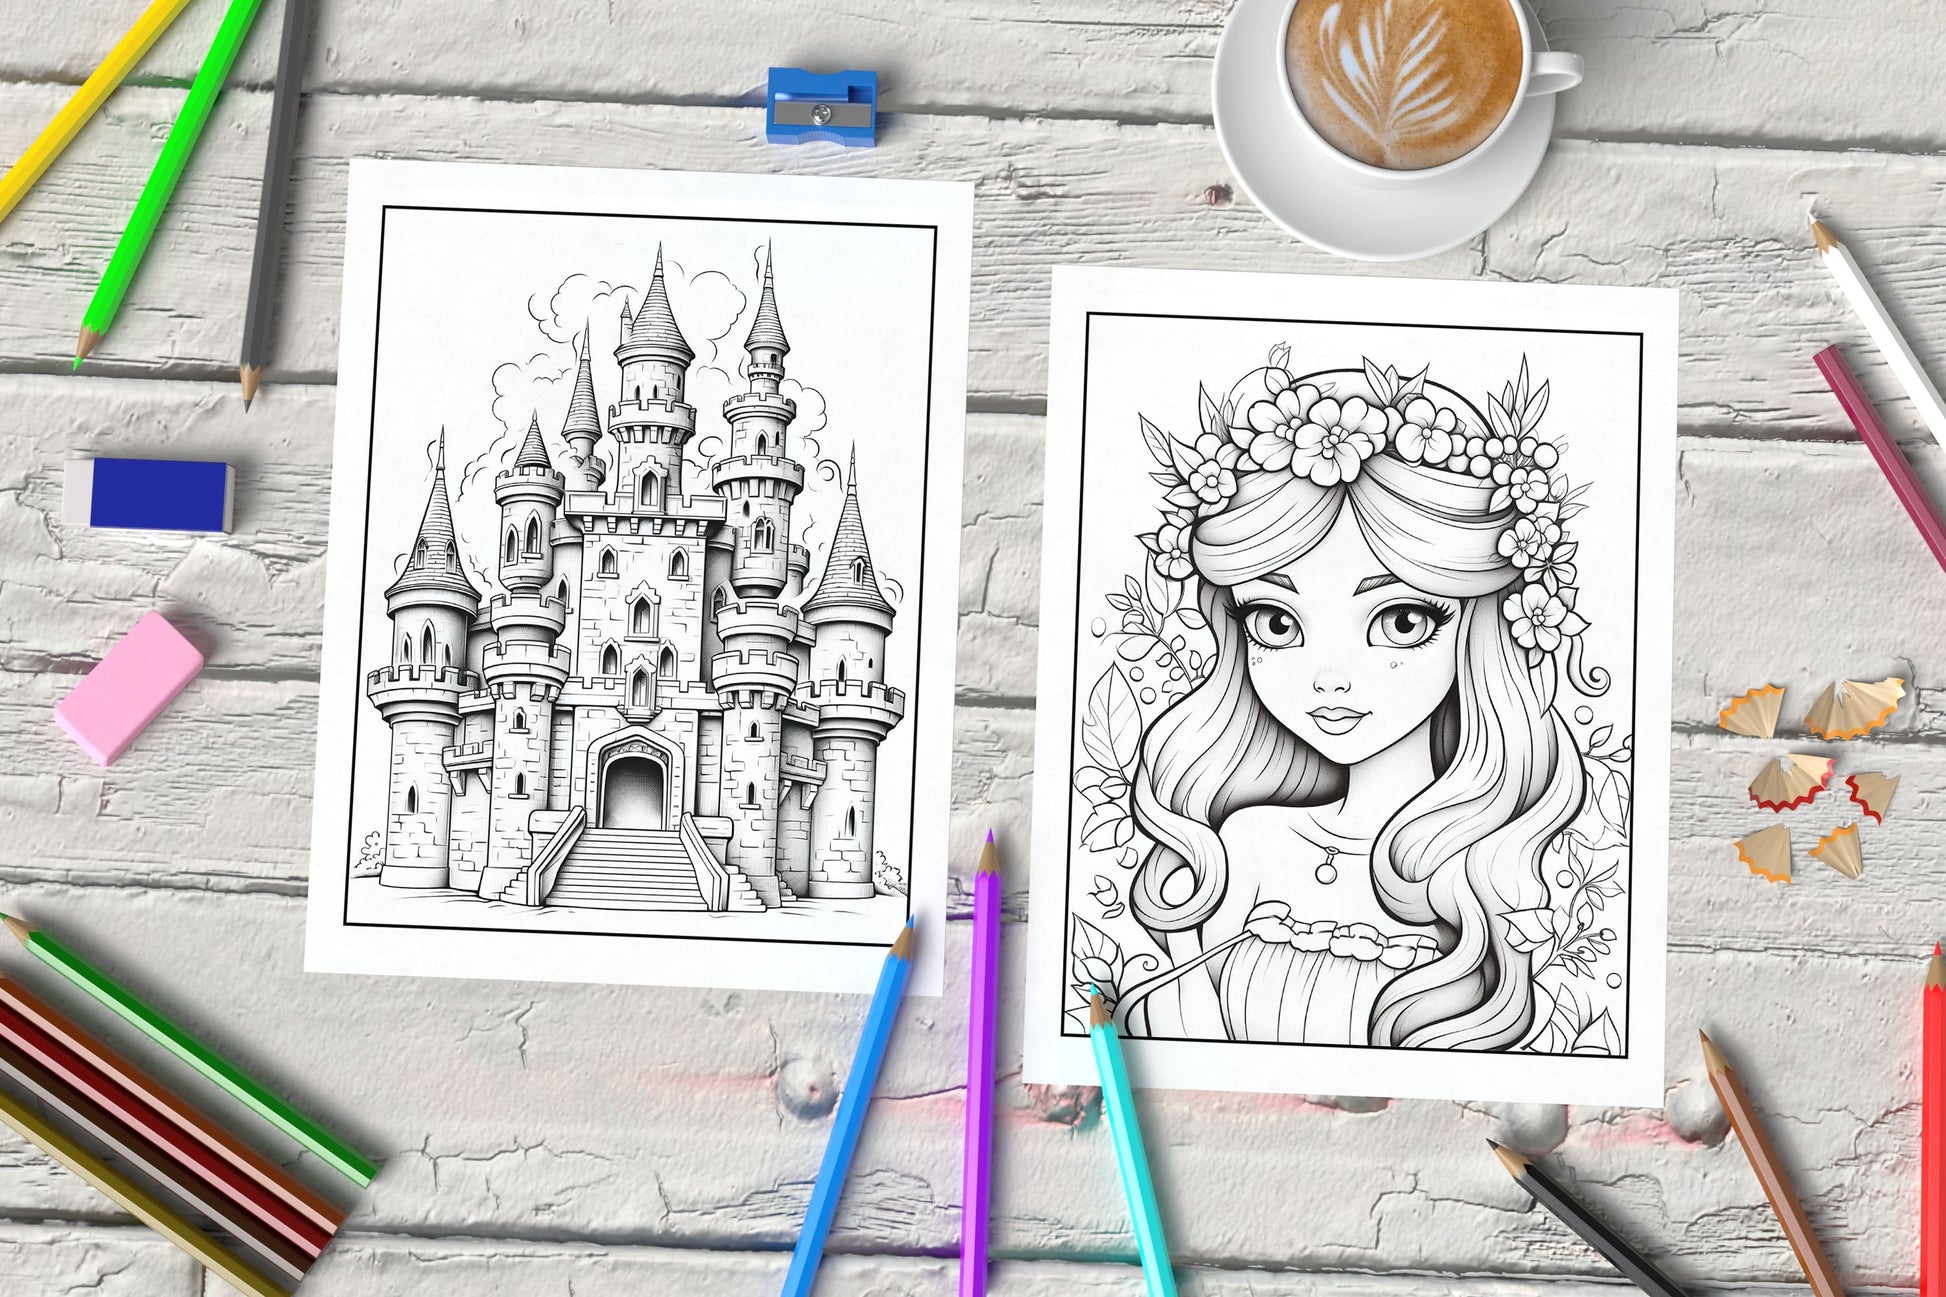 Princess Coloring Book for Kids - 100 Pages - Coloring Pages - Mama Life Printables